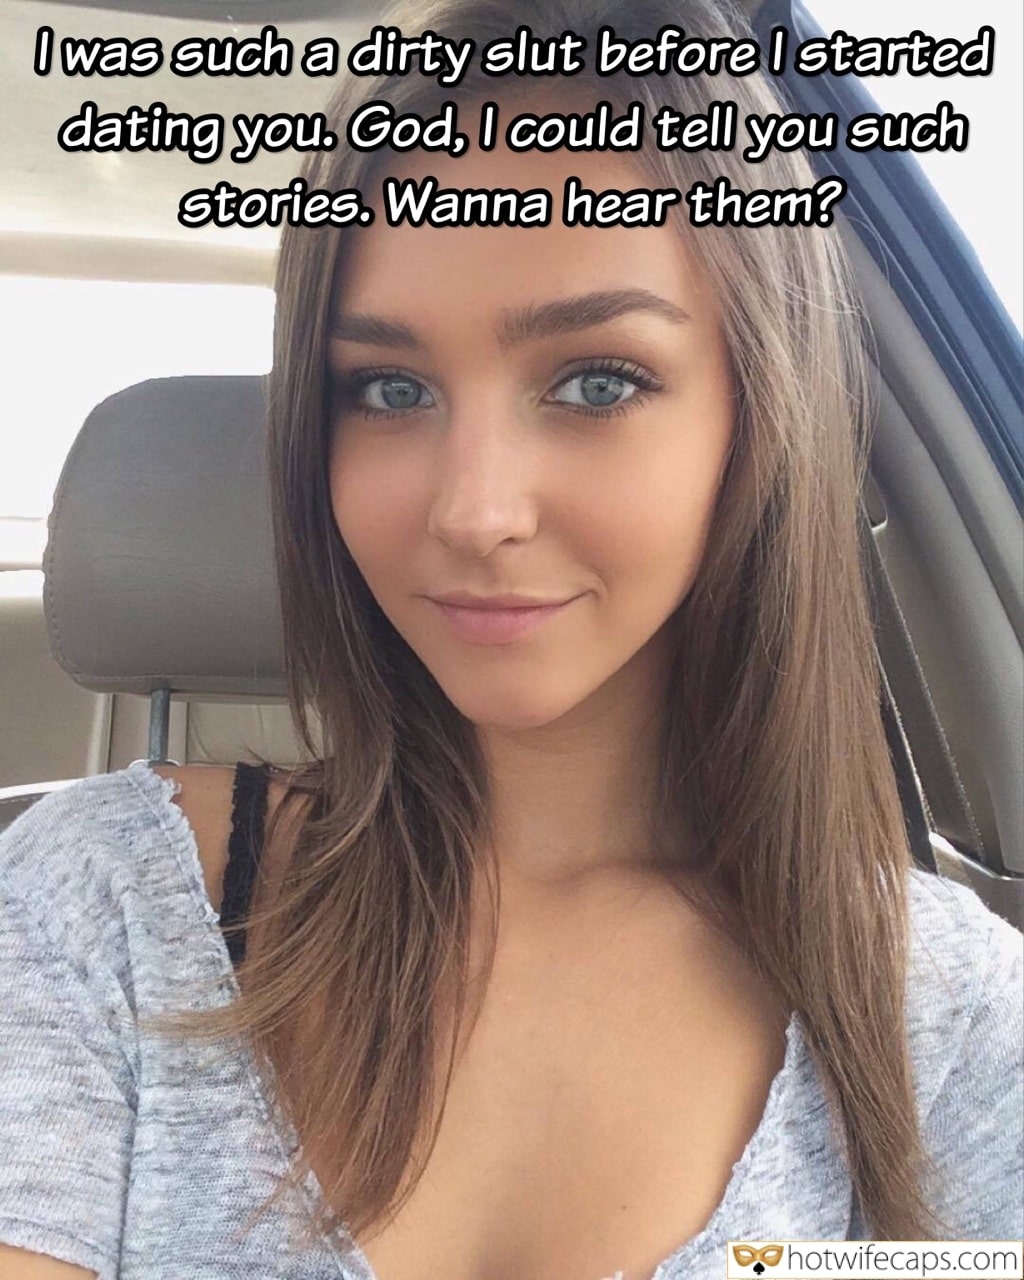 Tips Sexy Memes Cuckold Cleanup  hotwife caption: I was such a dirty slut before I started dating you. God, I could tell you such stories. Wanna hear them? Beautiful Girl in the Car